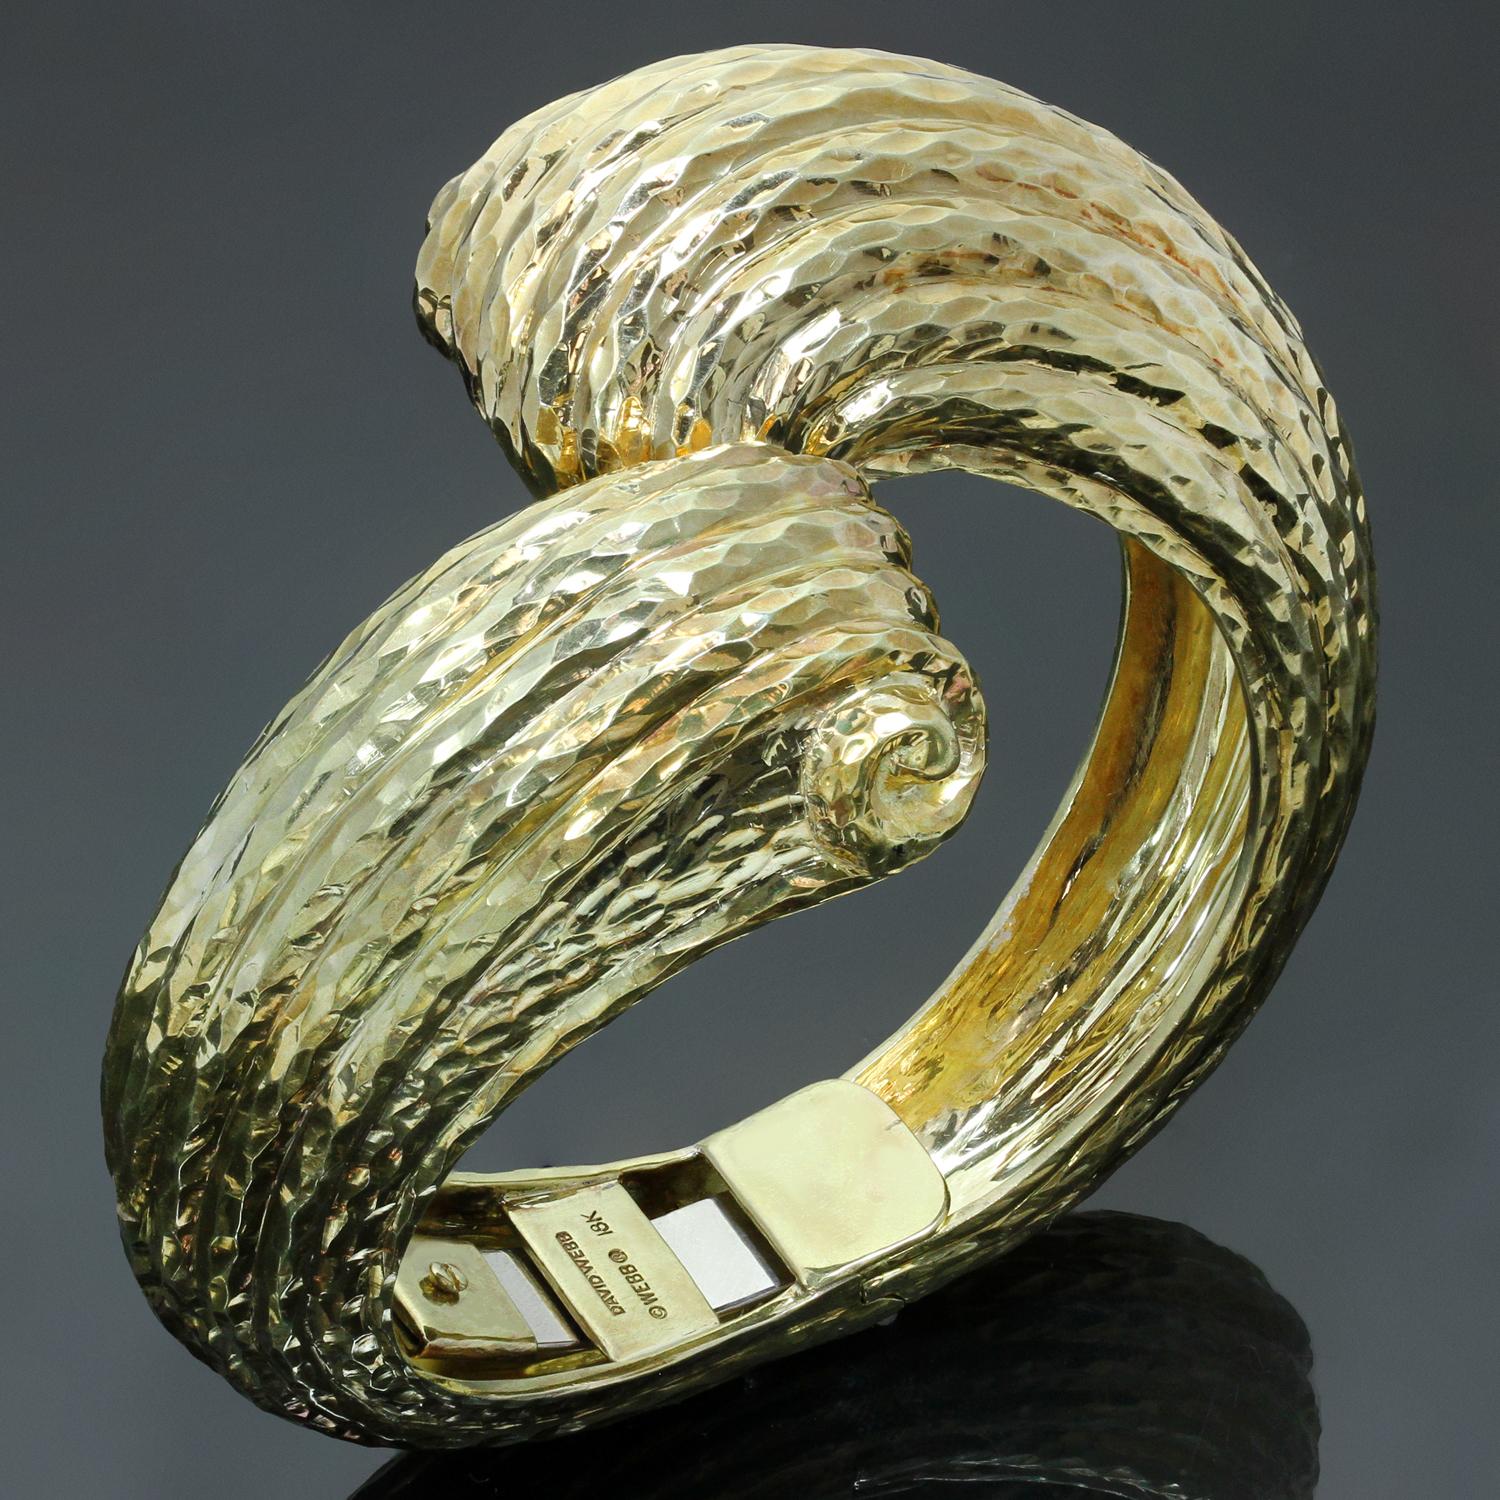 This chic and fabulous David Webb crossover cuff bracelet features a hammered texture crafted out of 18k solid yellow gold. Made in United States circa 1980s. Measurements: 2.04